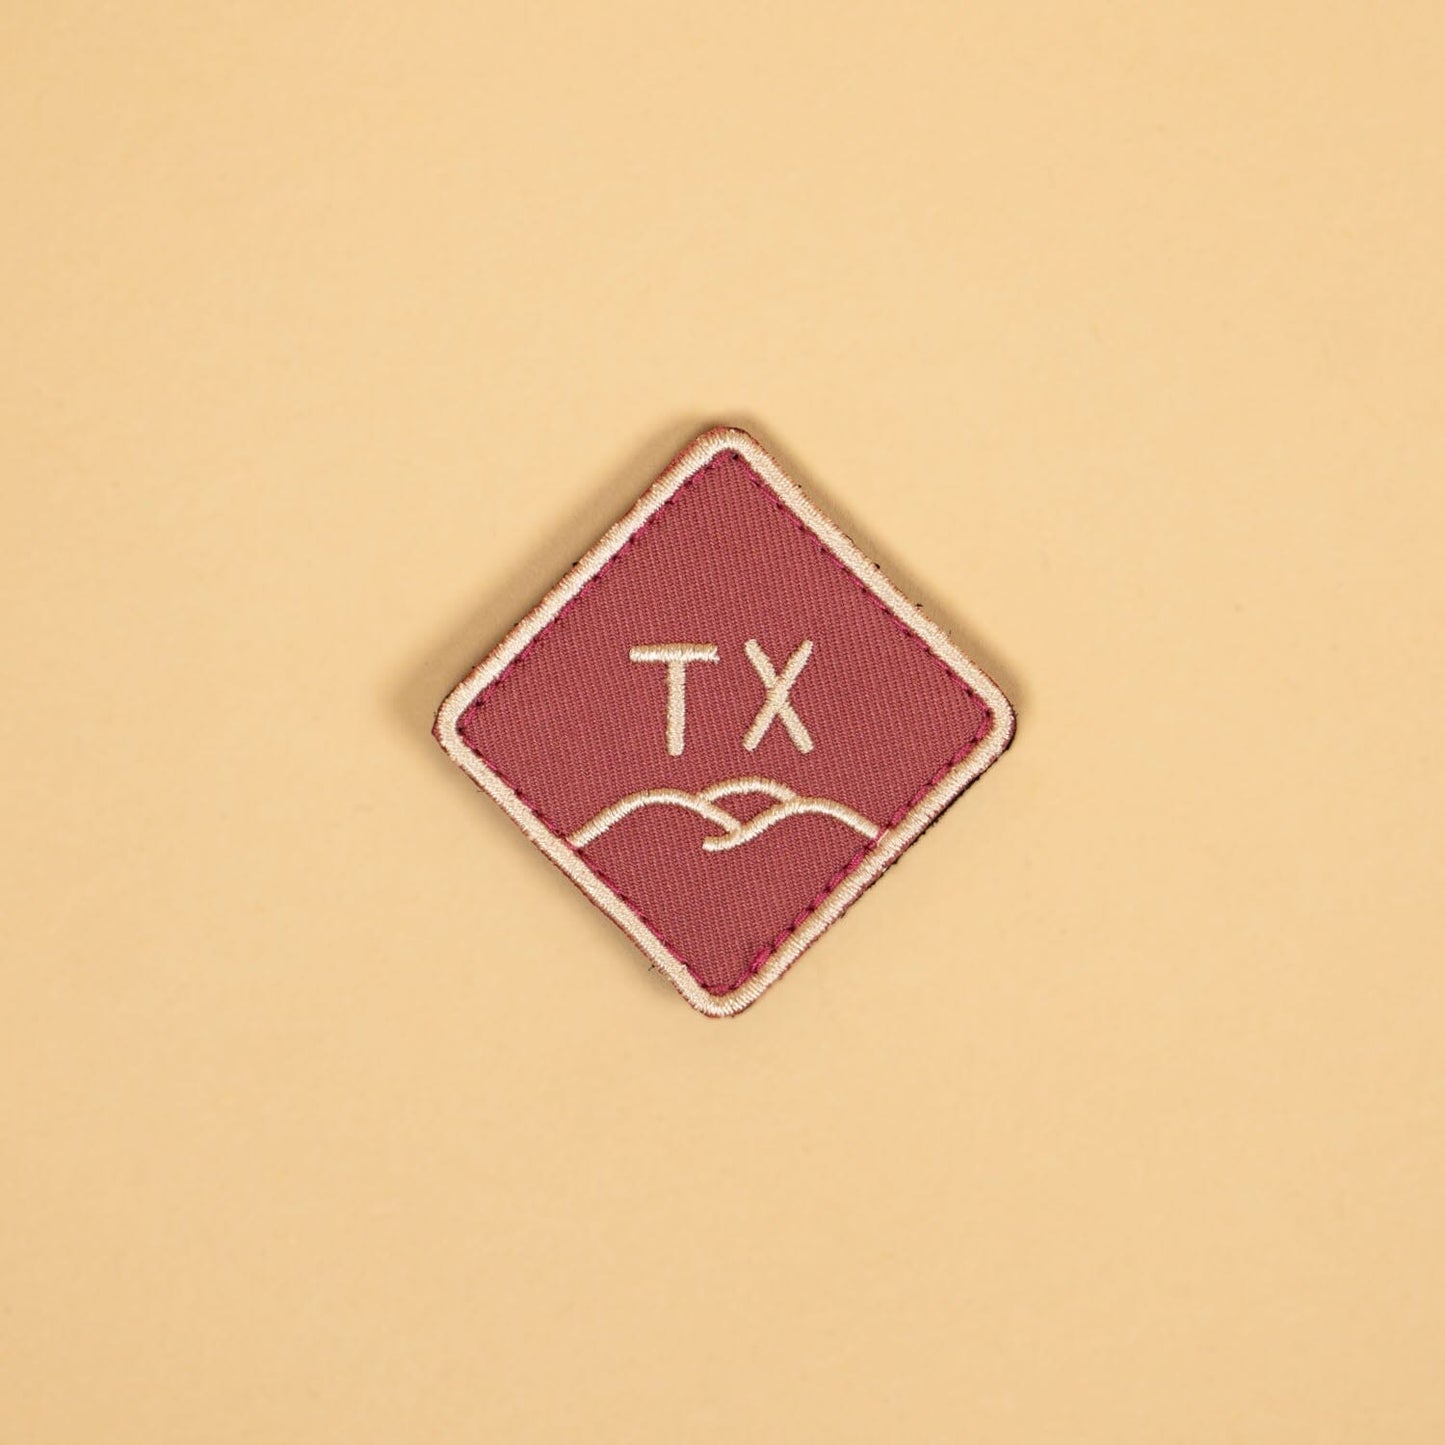 Texas Hills Diamond Velcro Patch Texas Hill Country Provisions 